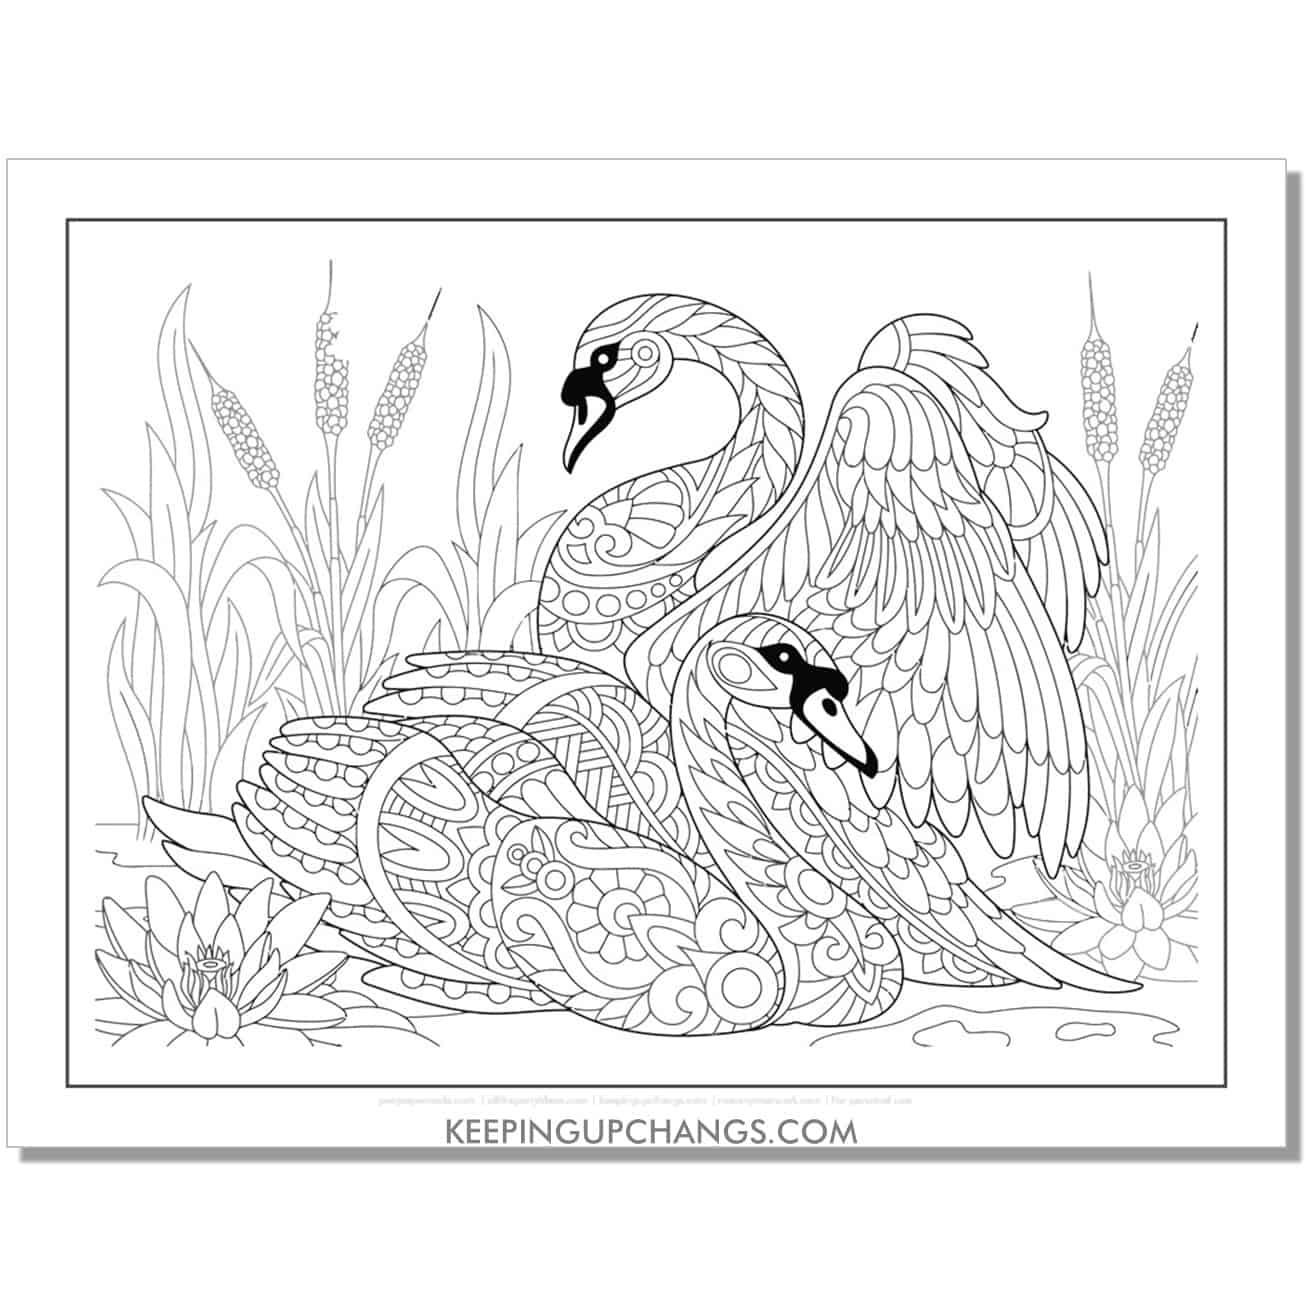 swan couple mating dance coloring page.